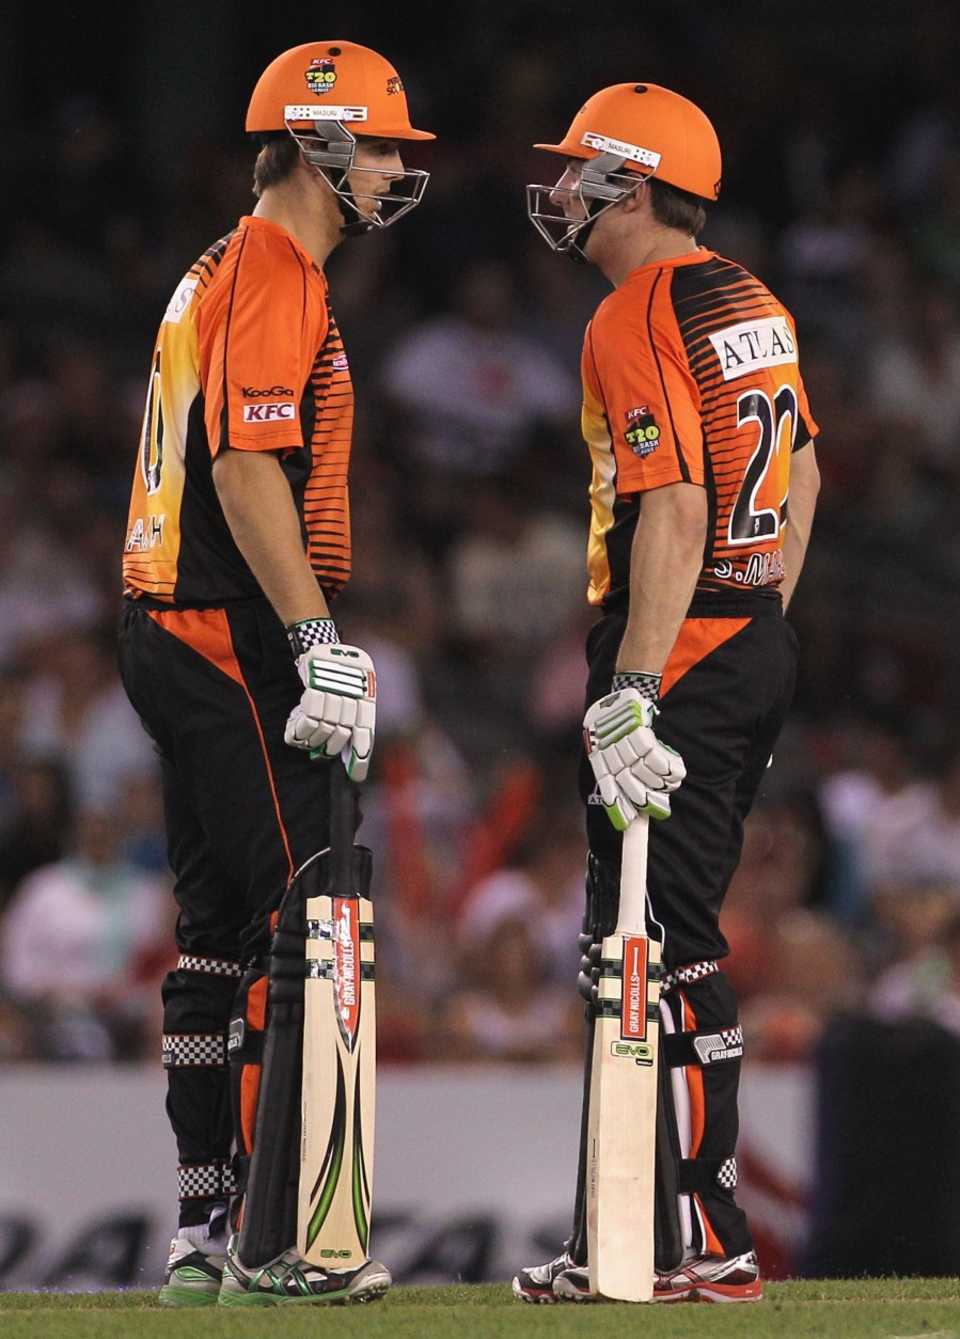 The Marsh brothers, Mitchell (left) and Shaun (right), Melbourne Renegades v Perth, BBL, Melbourne (Docklands), December 22, 2011